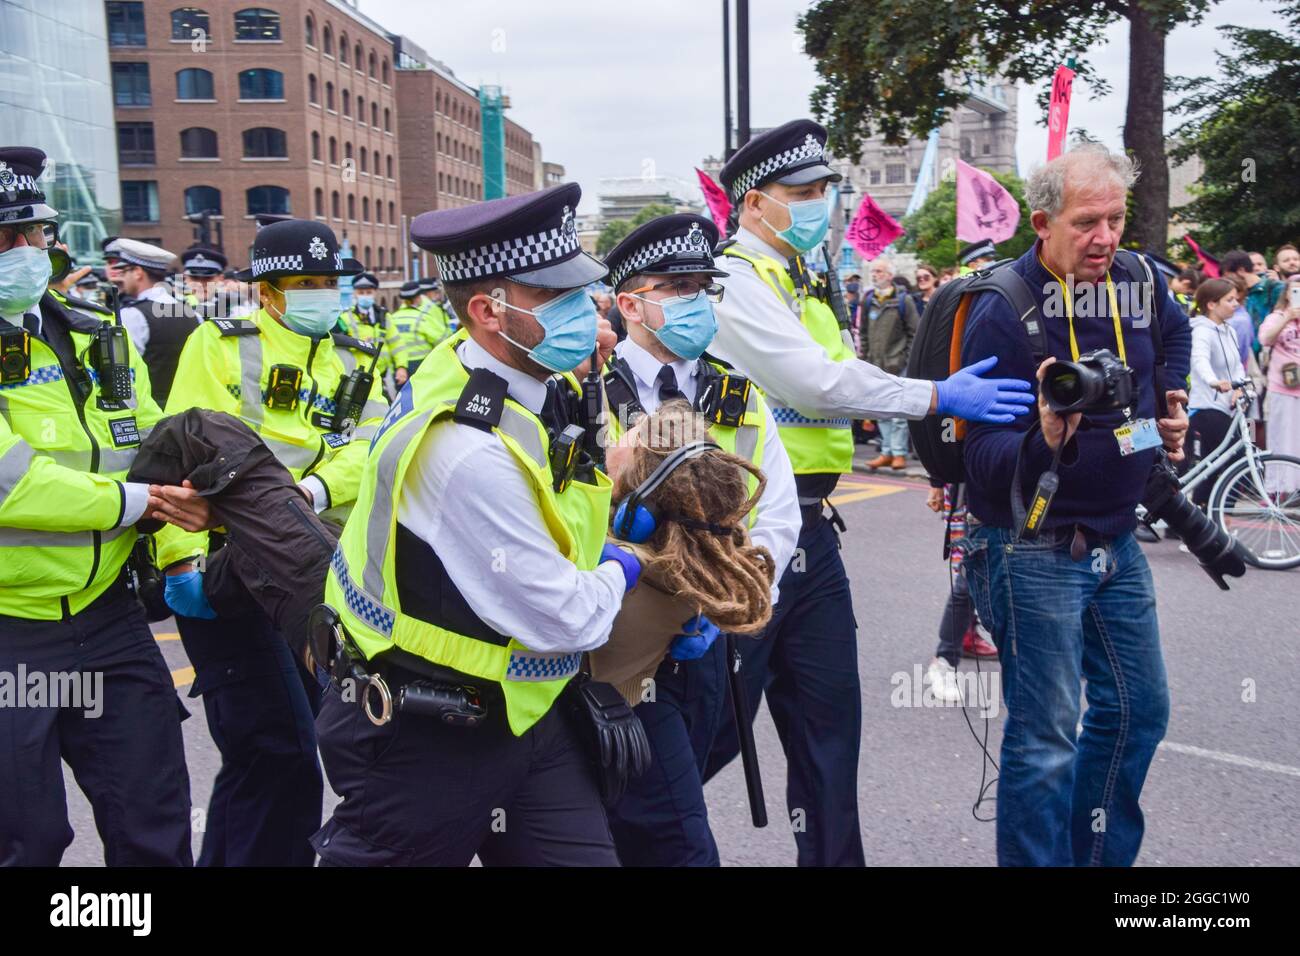 London, United Kingdom. 30th August 2021. Police arrest a protester in Tower Hill. Extinction Rebellion protesters marched from News UK to Tower Bridge as part of their two-week Impossible Rebellion campaign. (Credit: Vuk Valcic / Alamy Live News) Stock Photo